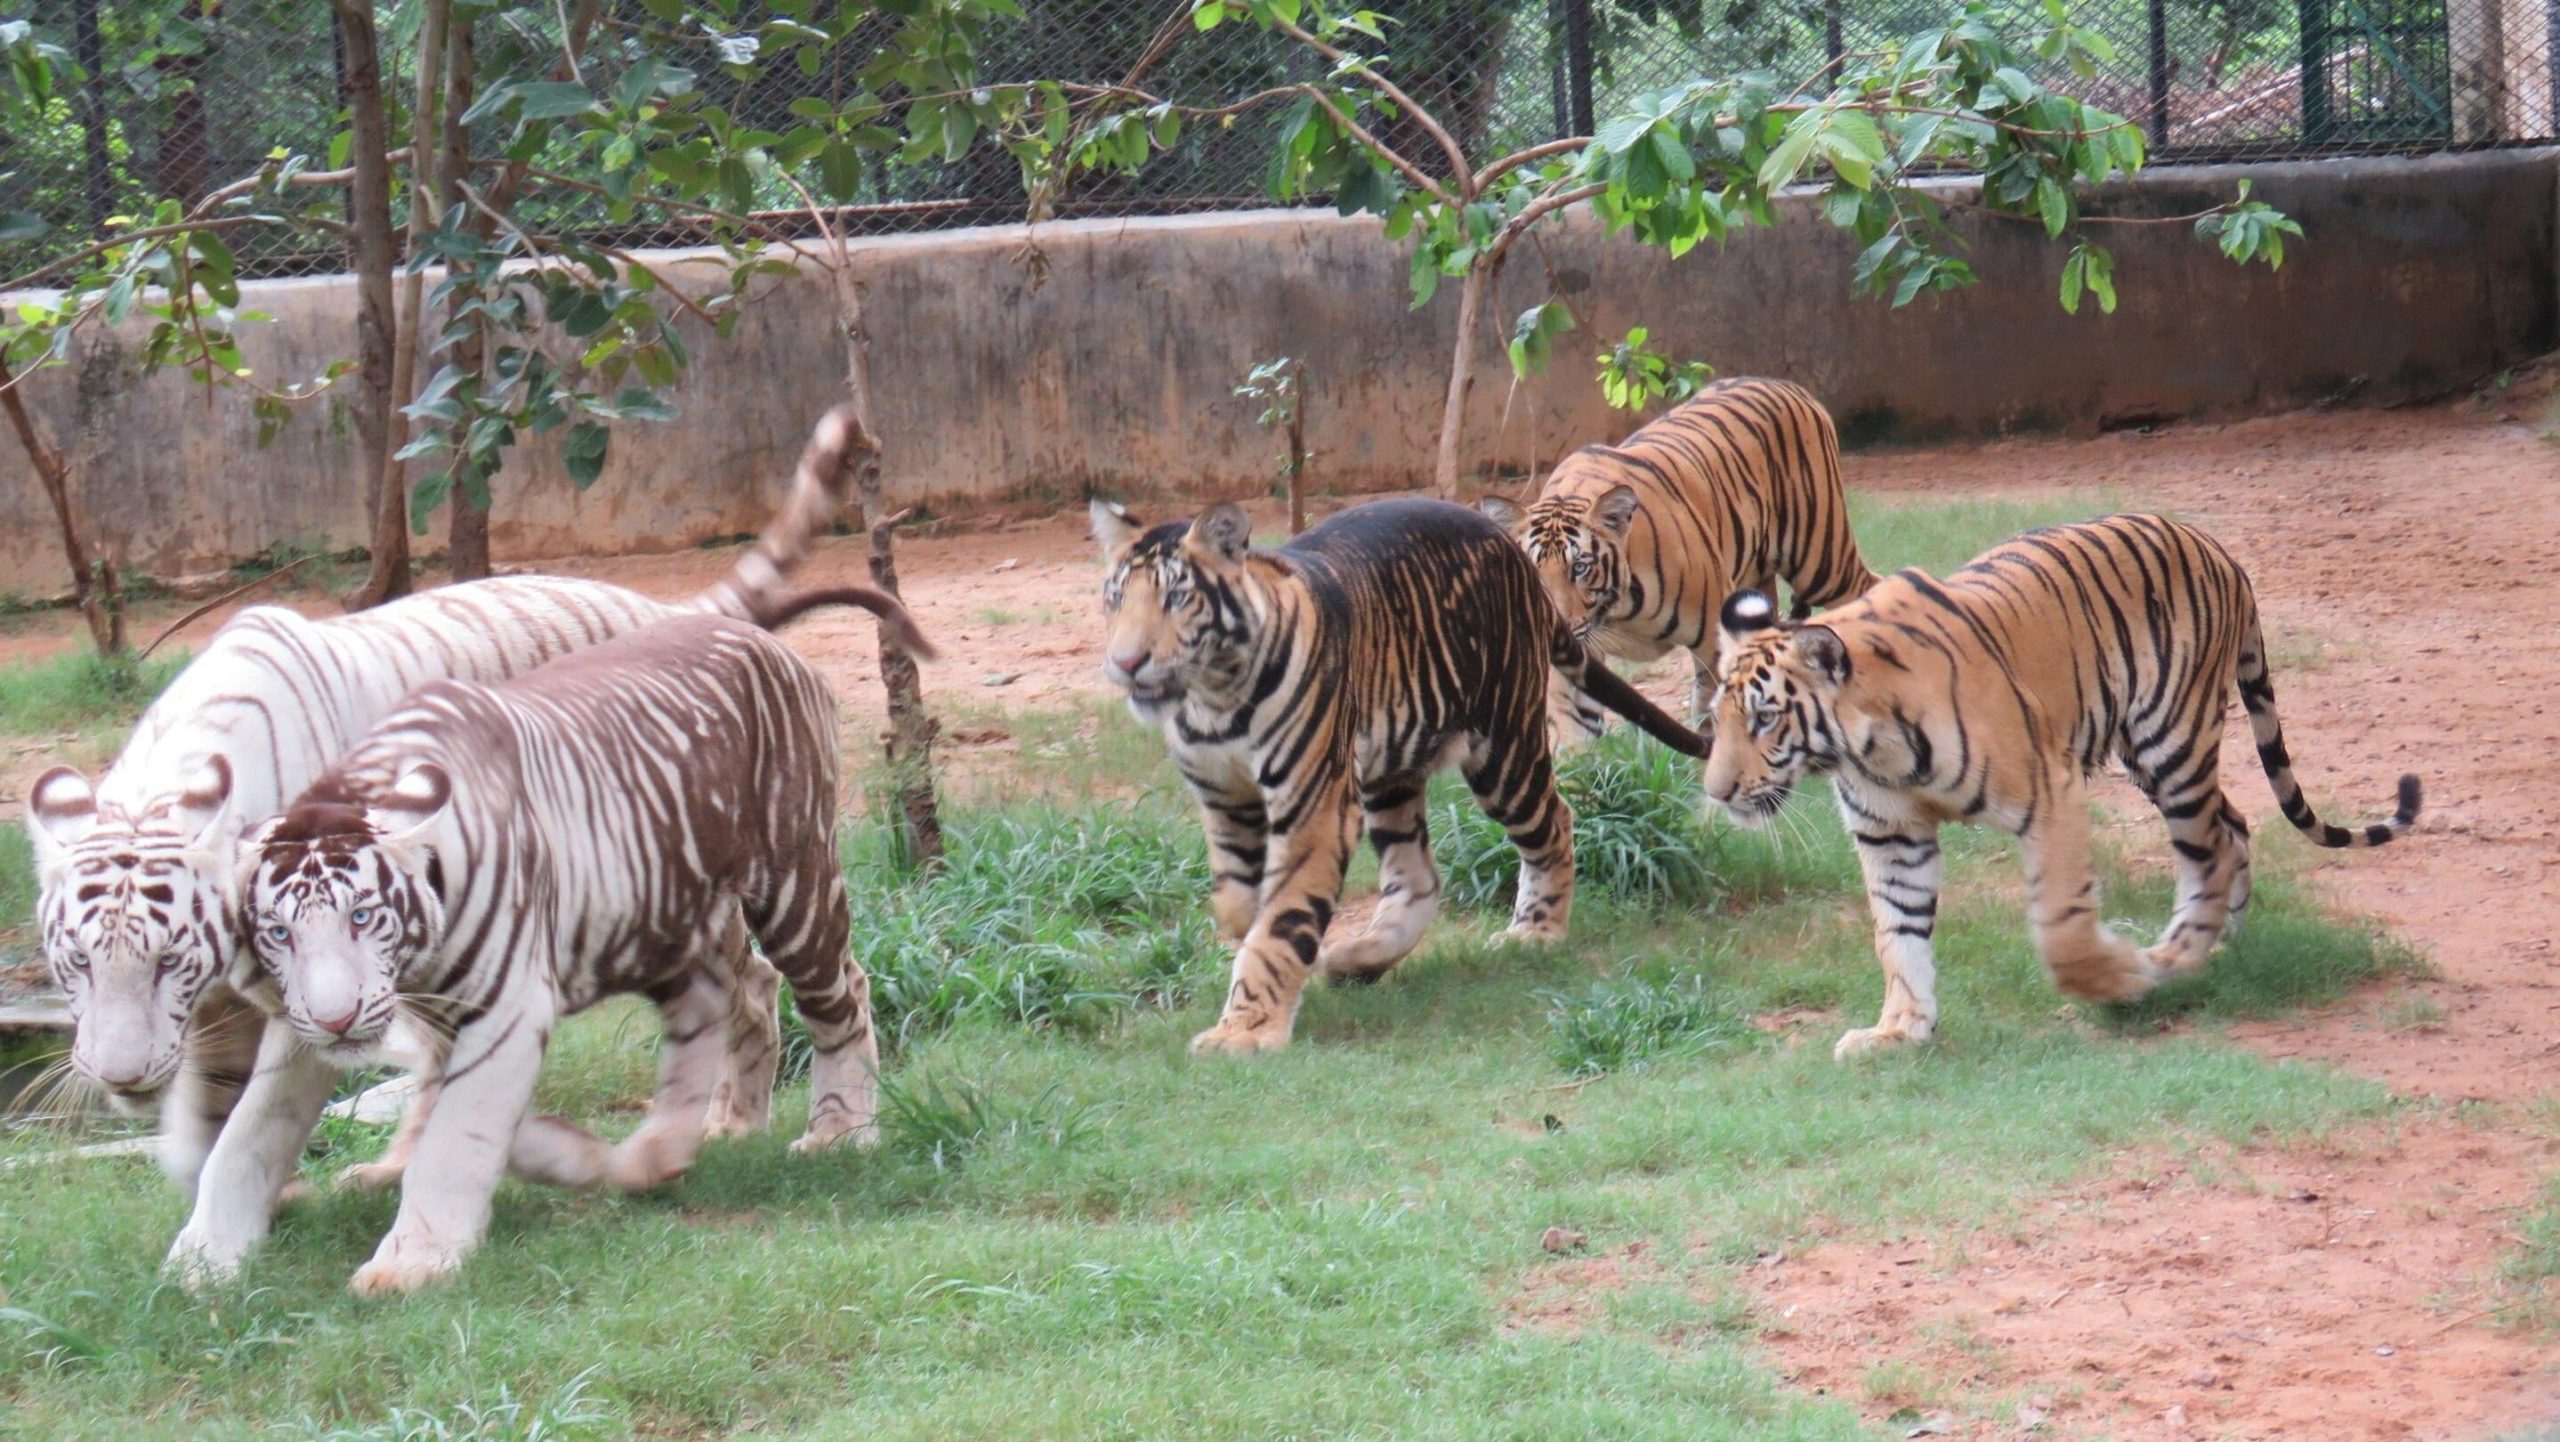 India's 'Black Tigers' Have Unusually Thick Stripes Thanks to a